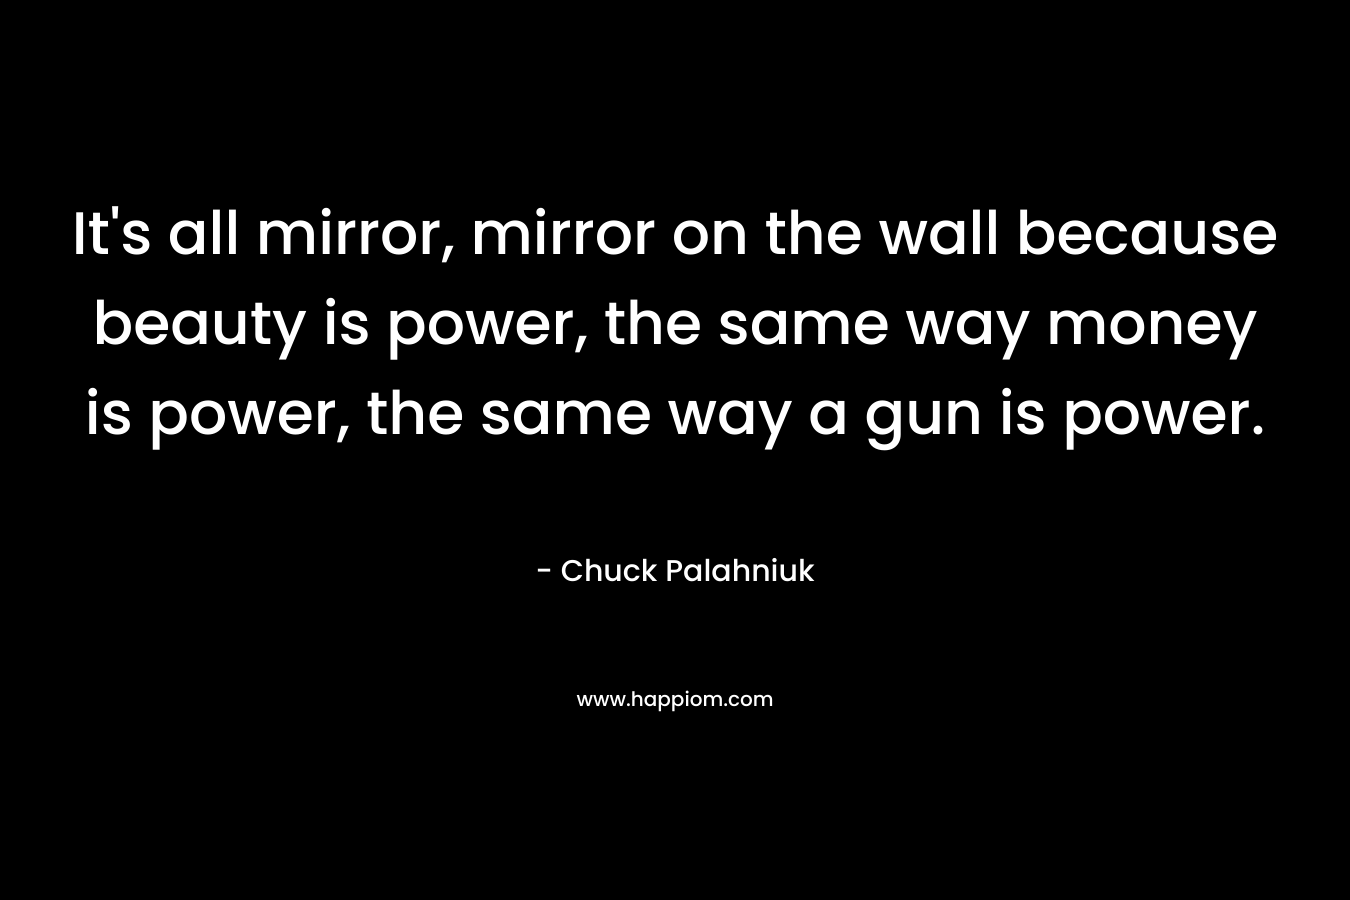 It's all mirror, mirror on the wall because beauty is power, the same way money is power, the same way a gun is power.